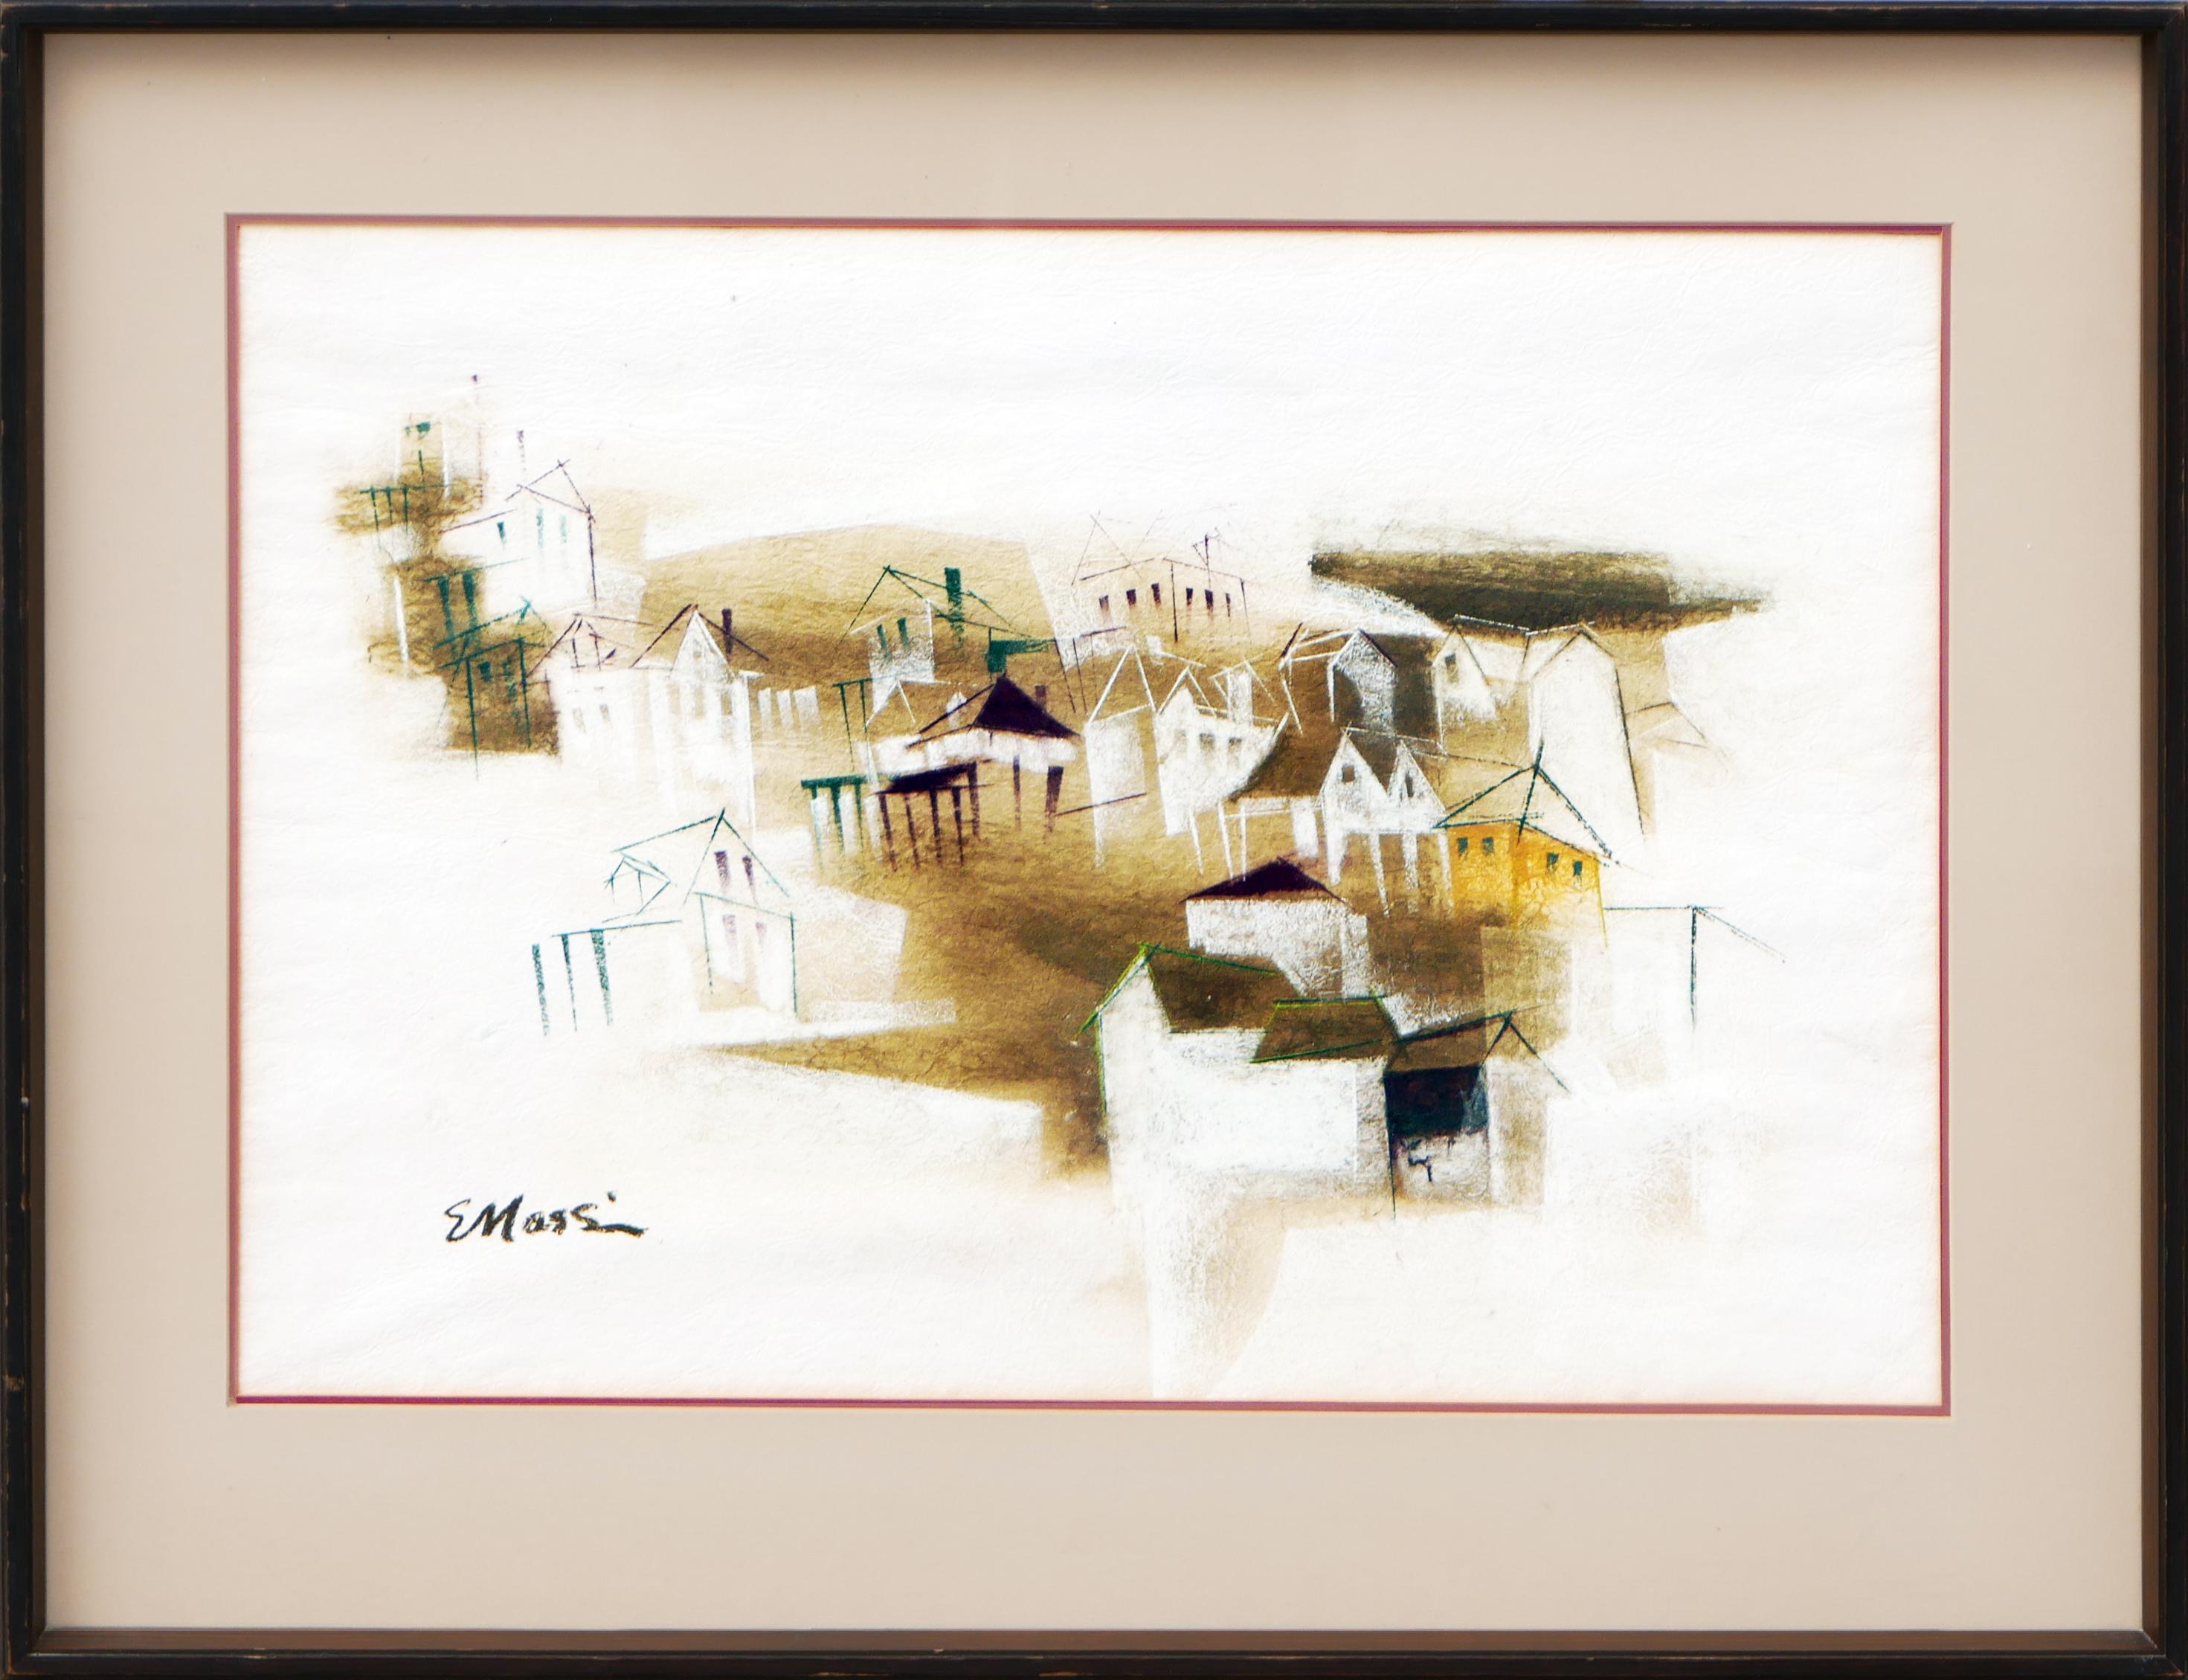 Eugene Massin Abstract Drawing - Modern Minimalist Ochre and White Toned Abstract City Landscape Pastel Drawing